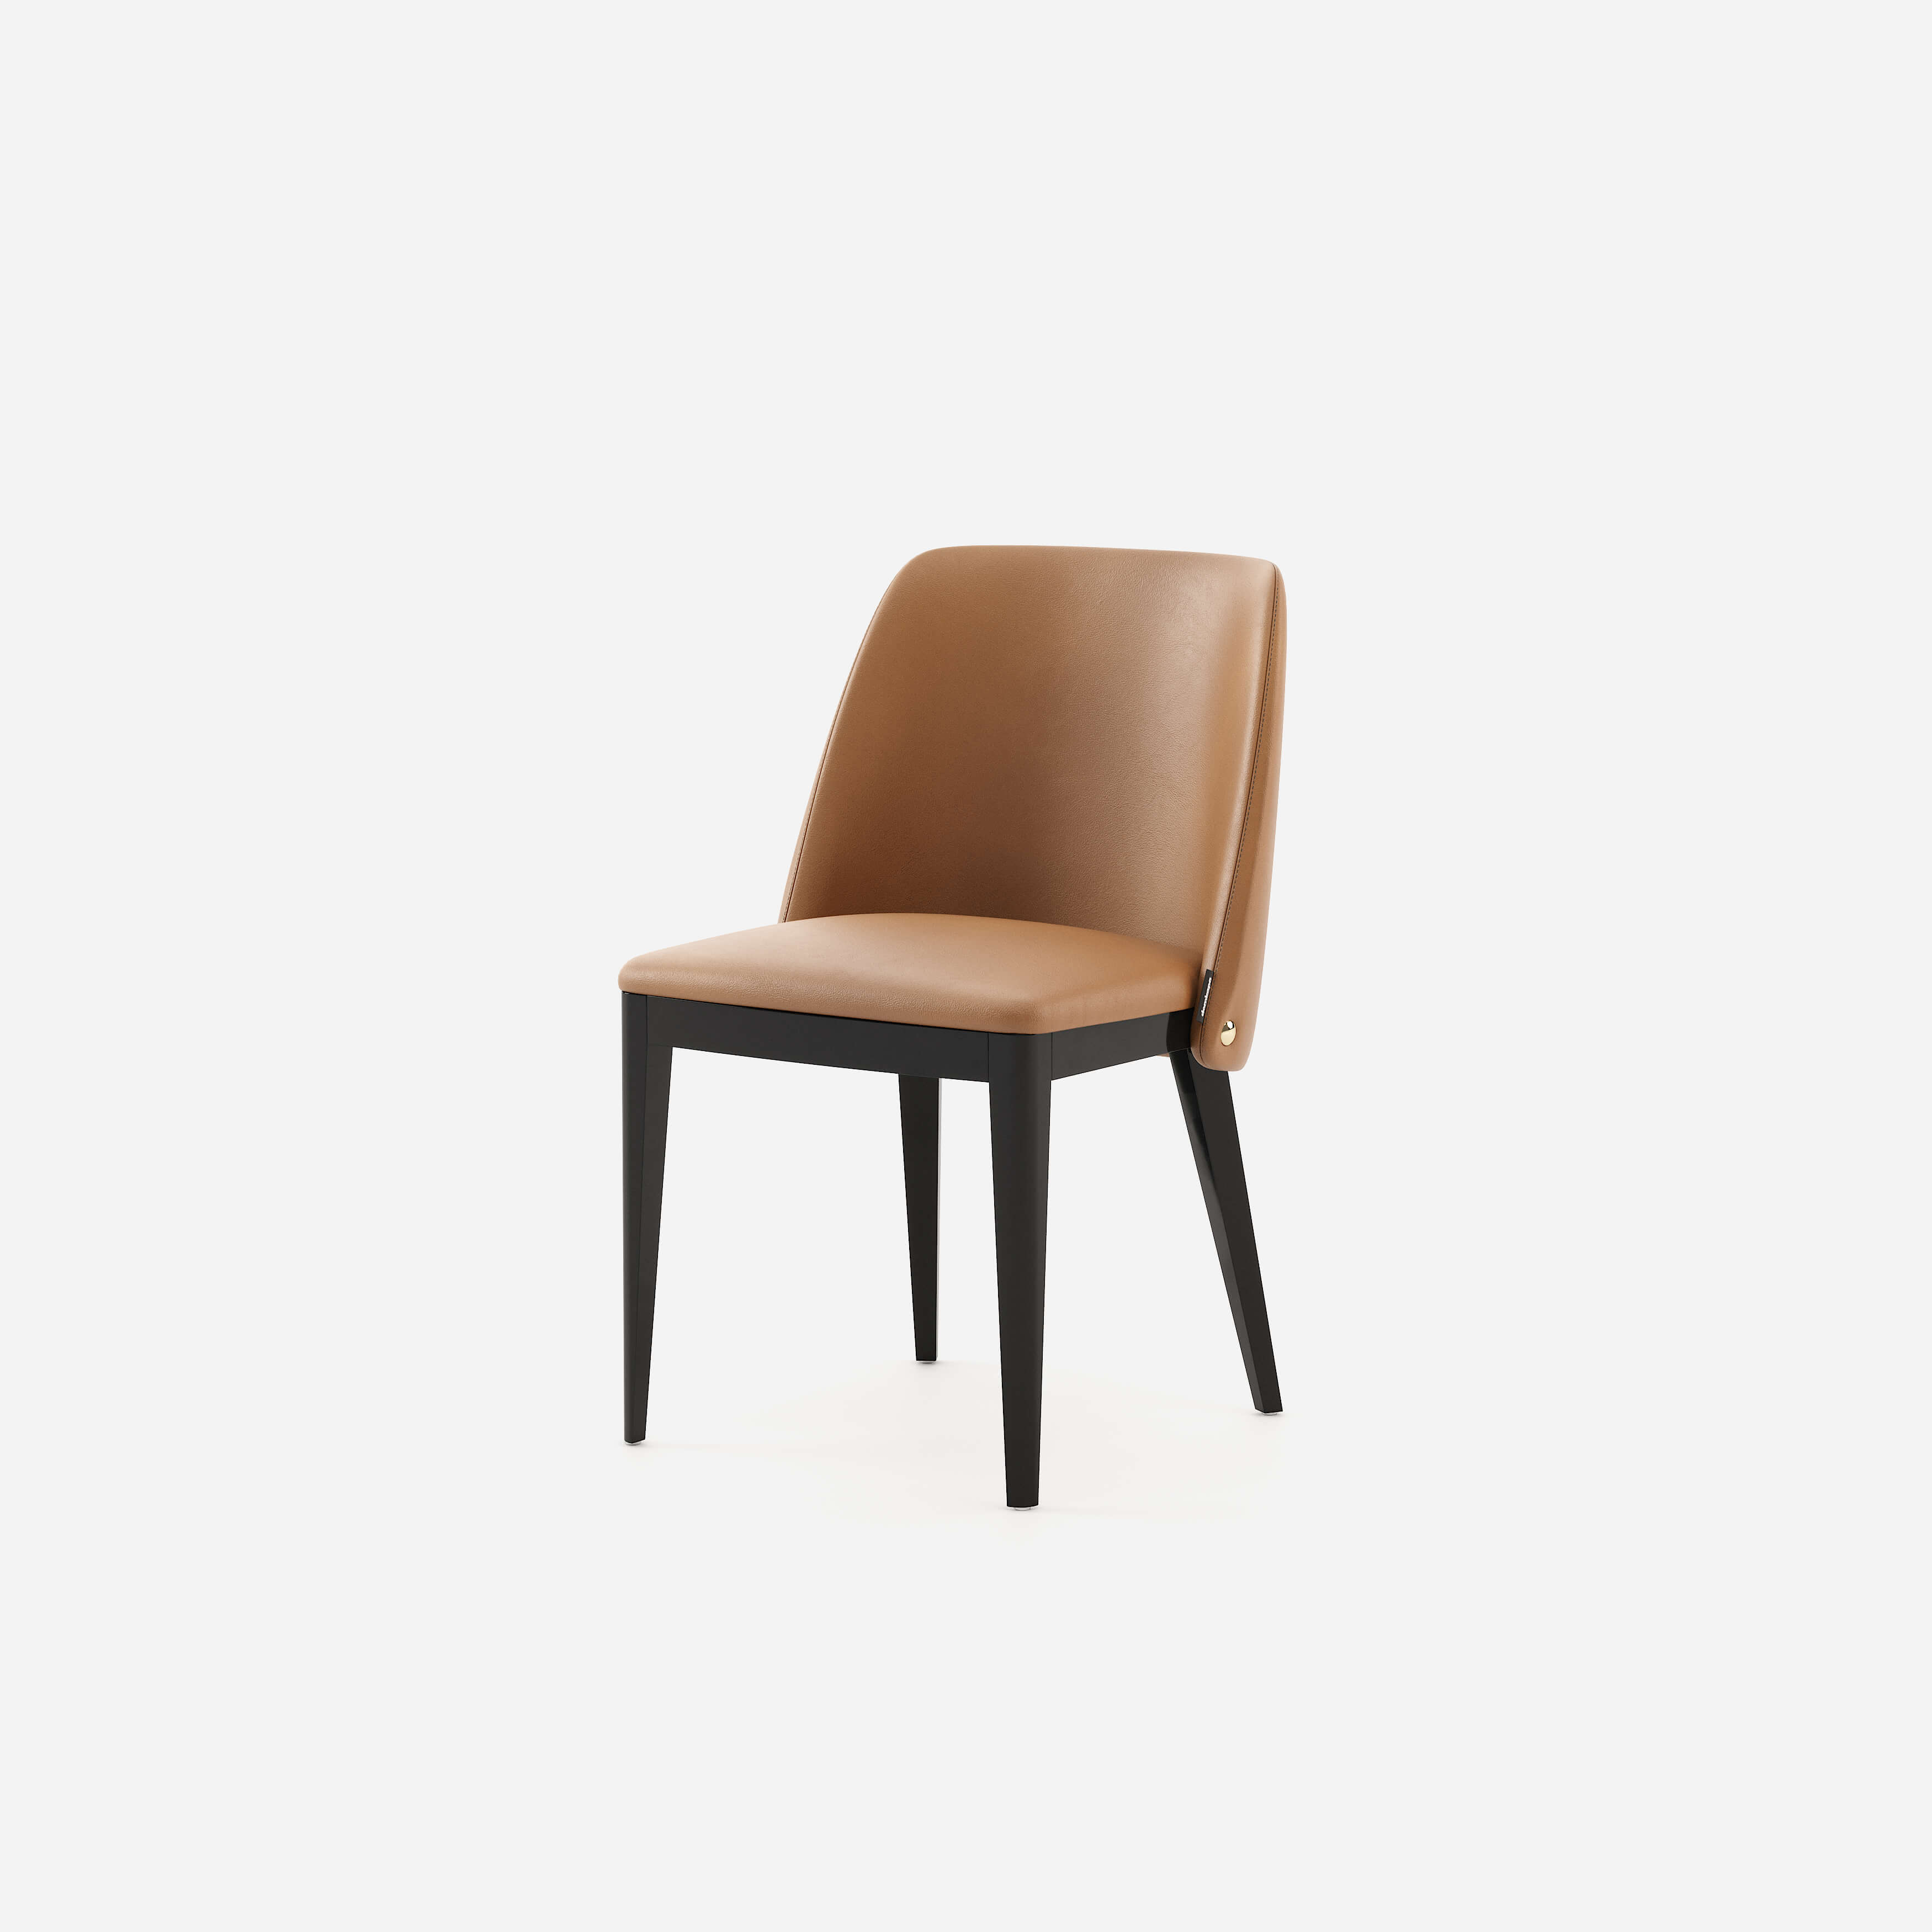 ingrid-chair-classic-silhouette-seating-piece-mid-century-living-room-leather-domkapa-1